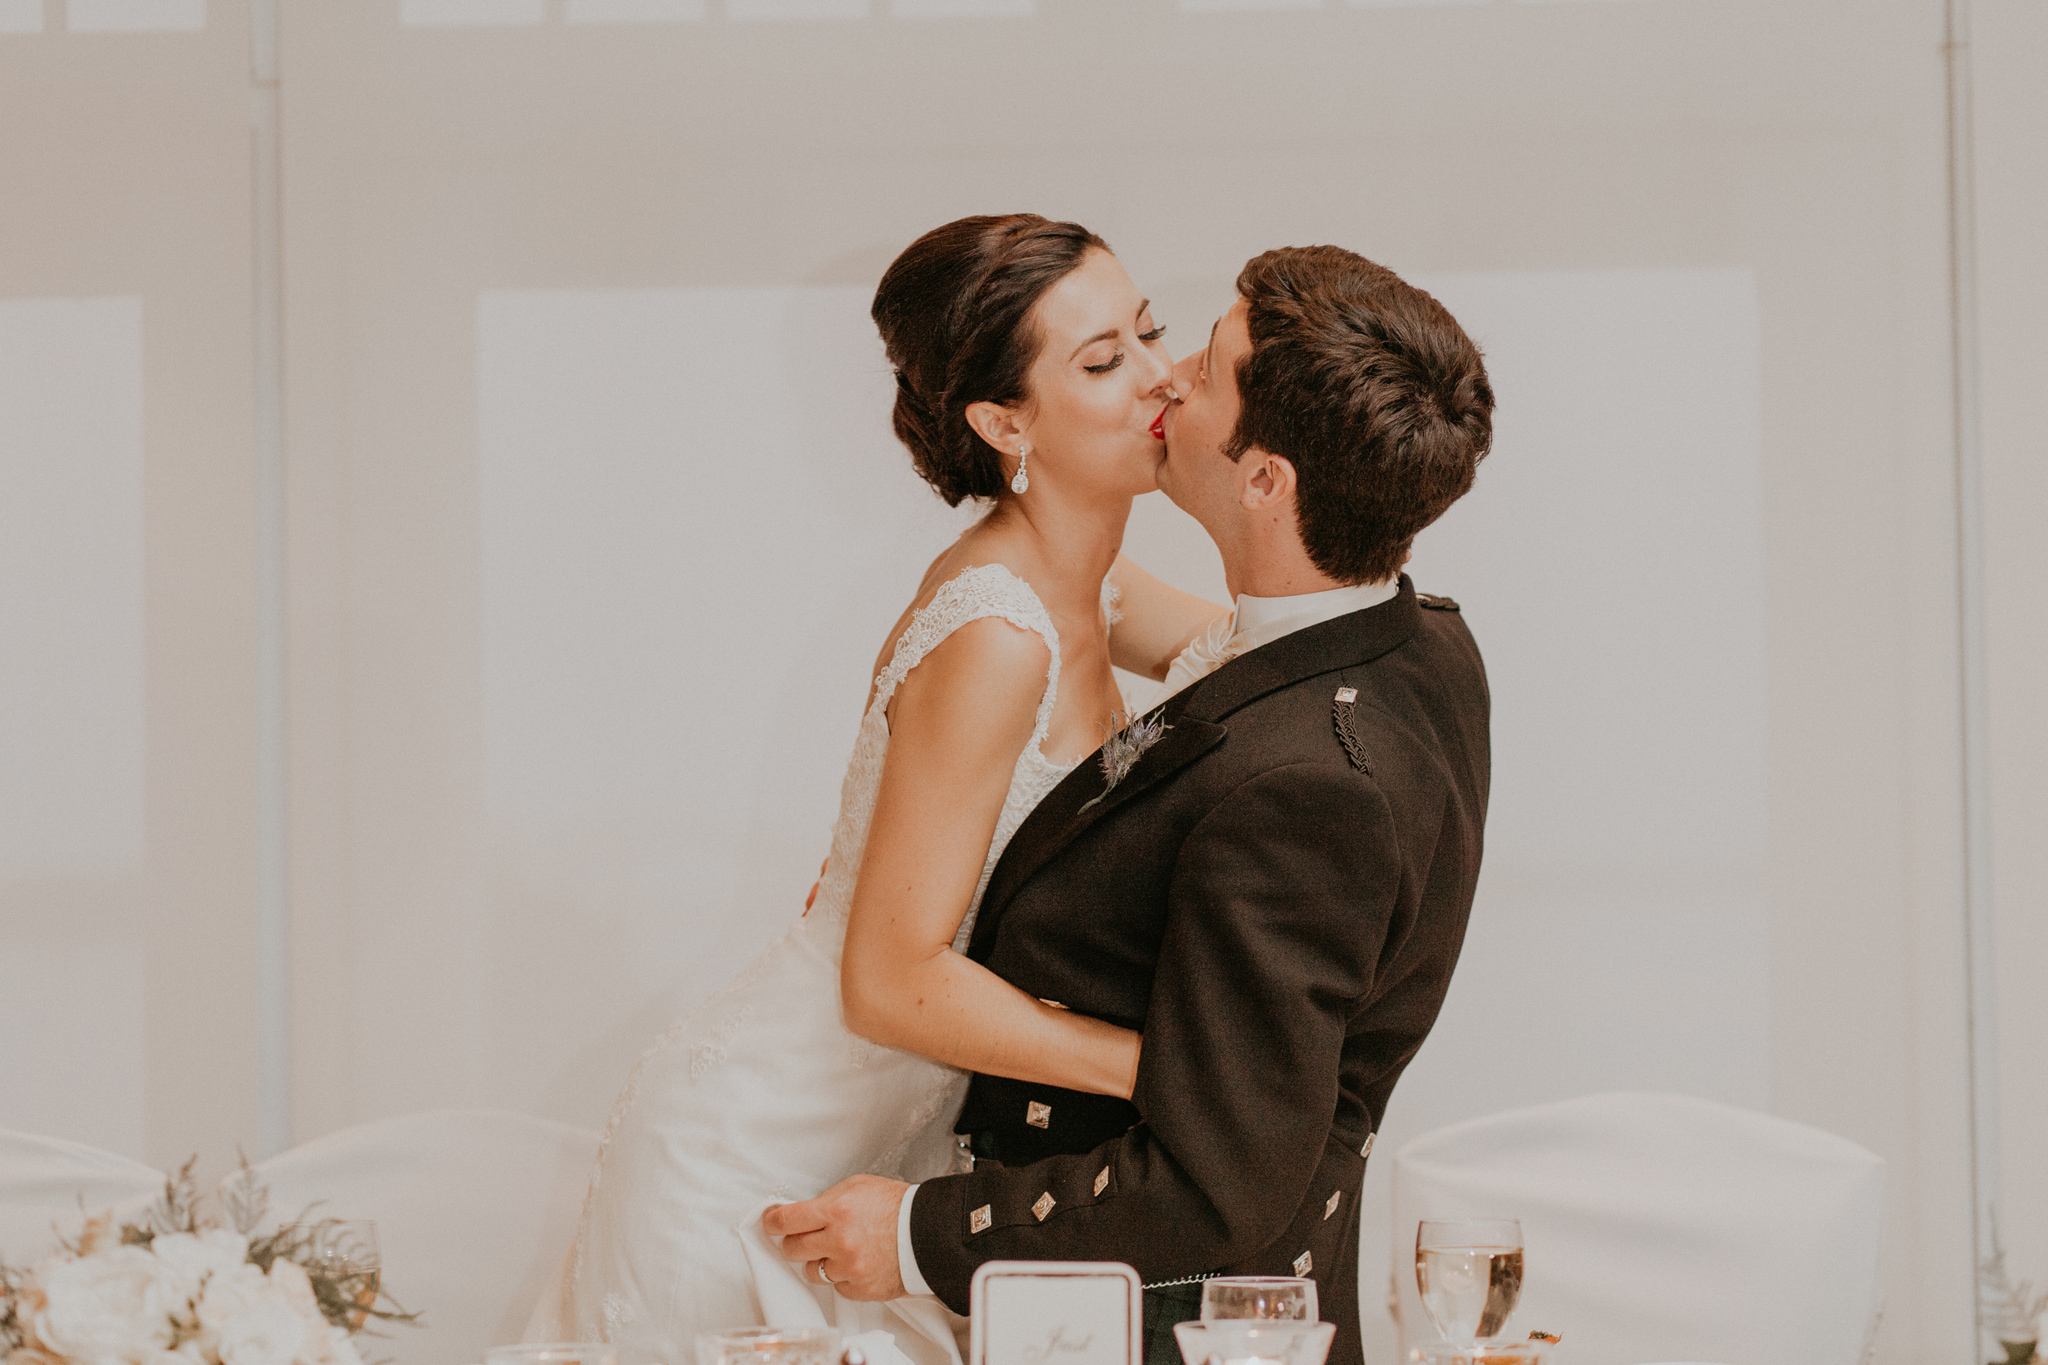 Bride and groom kiss during wedding reception